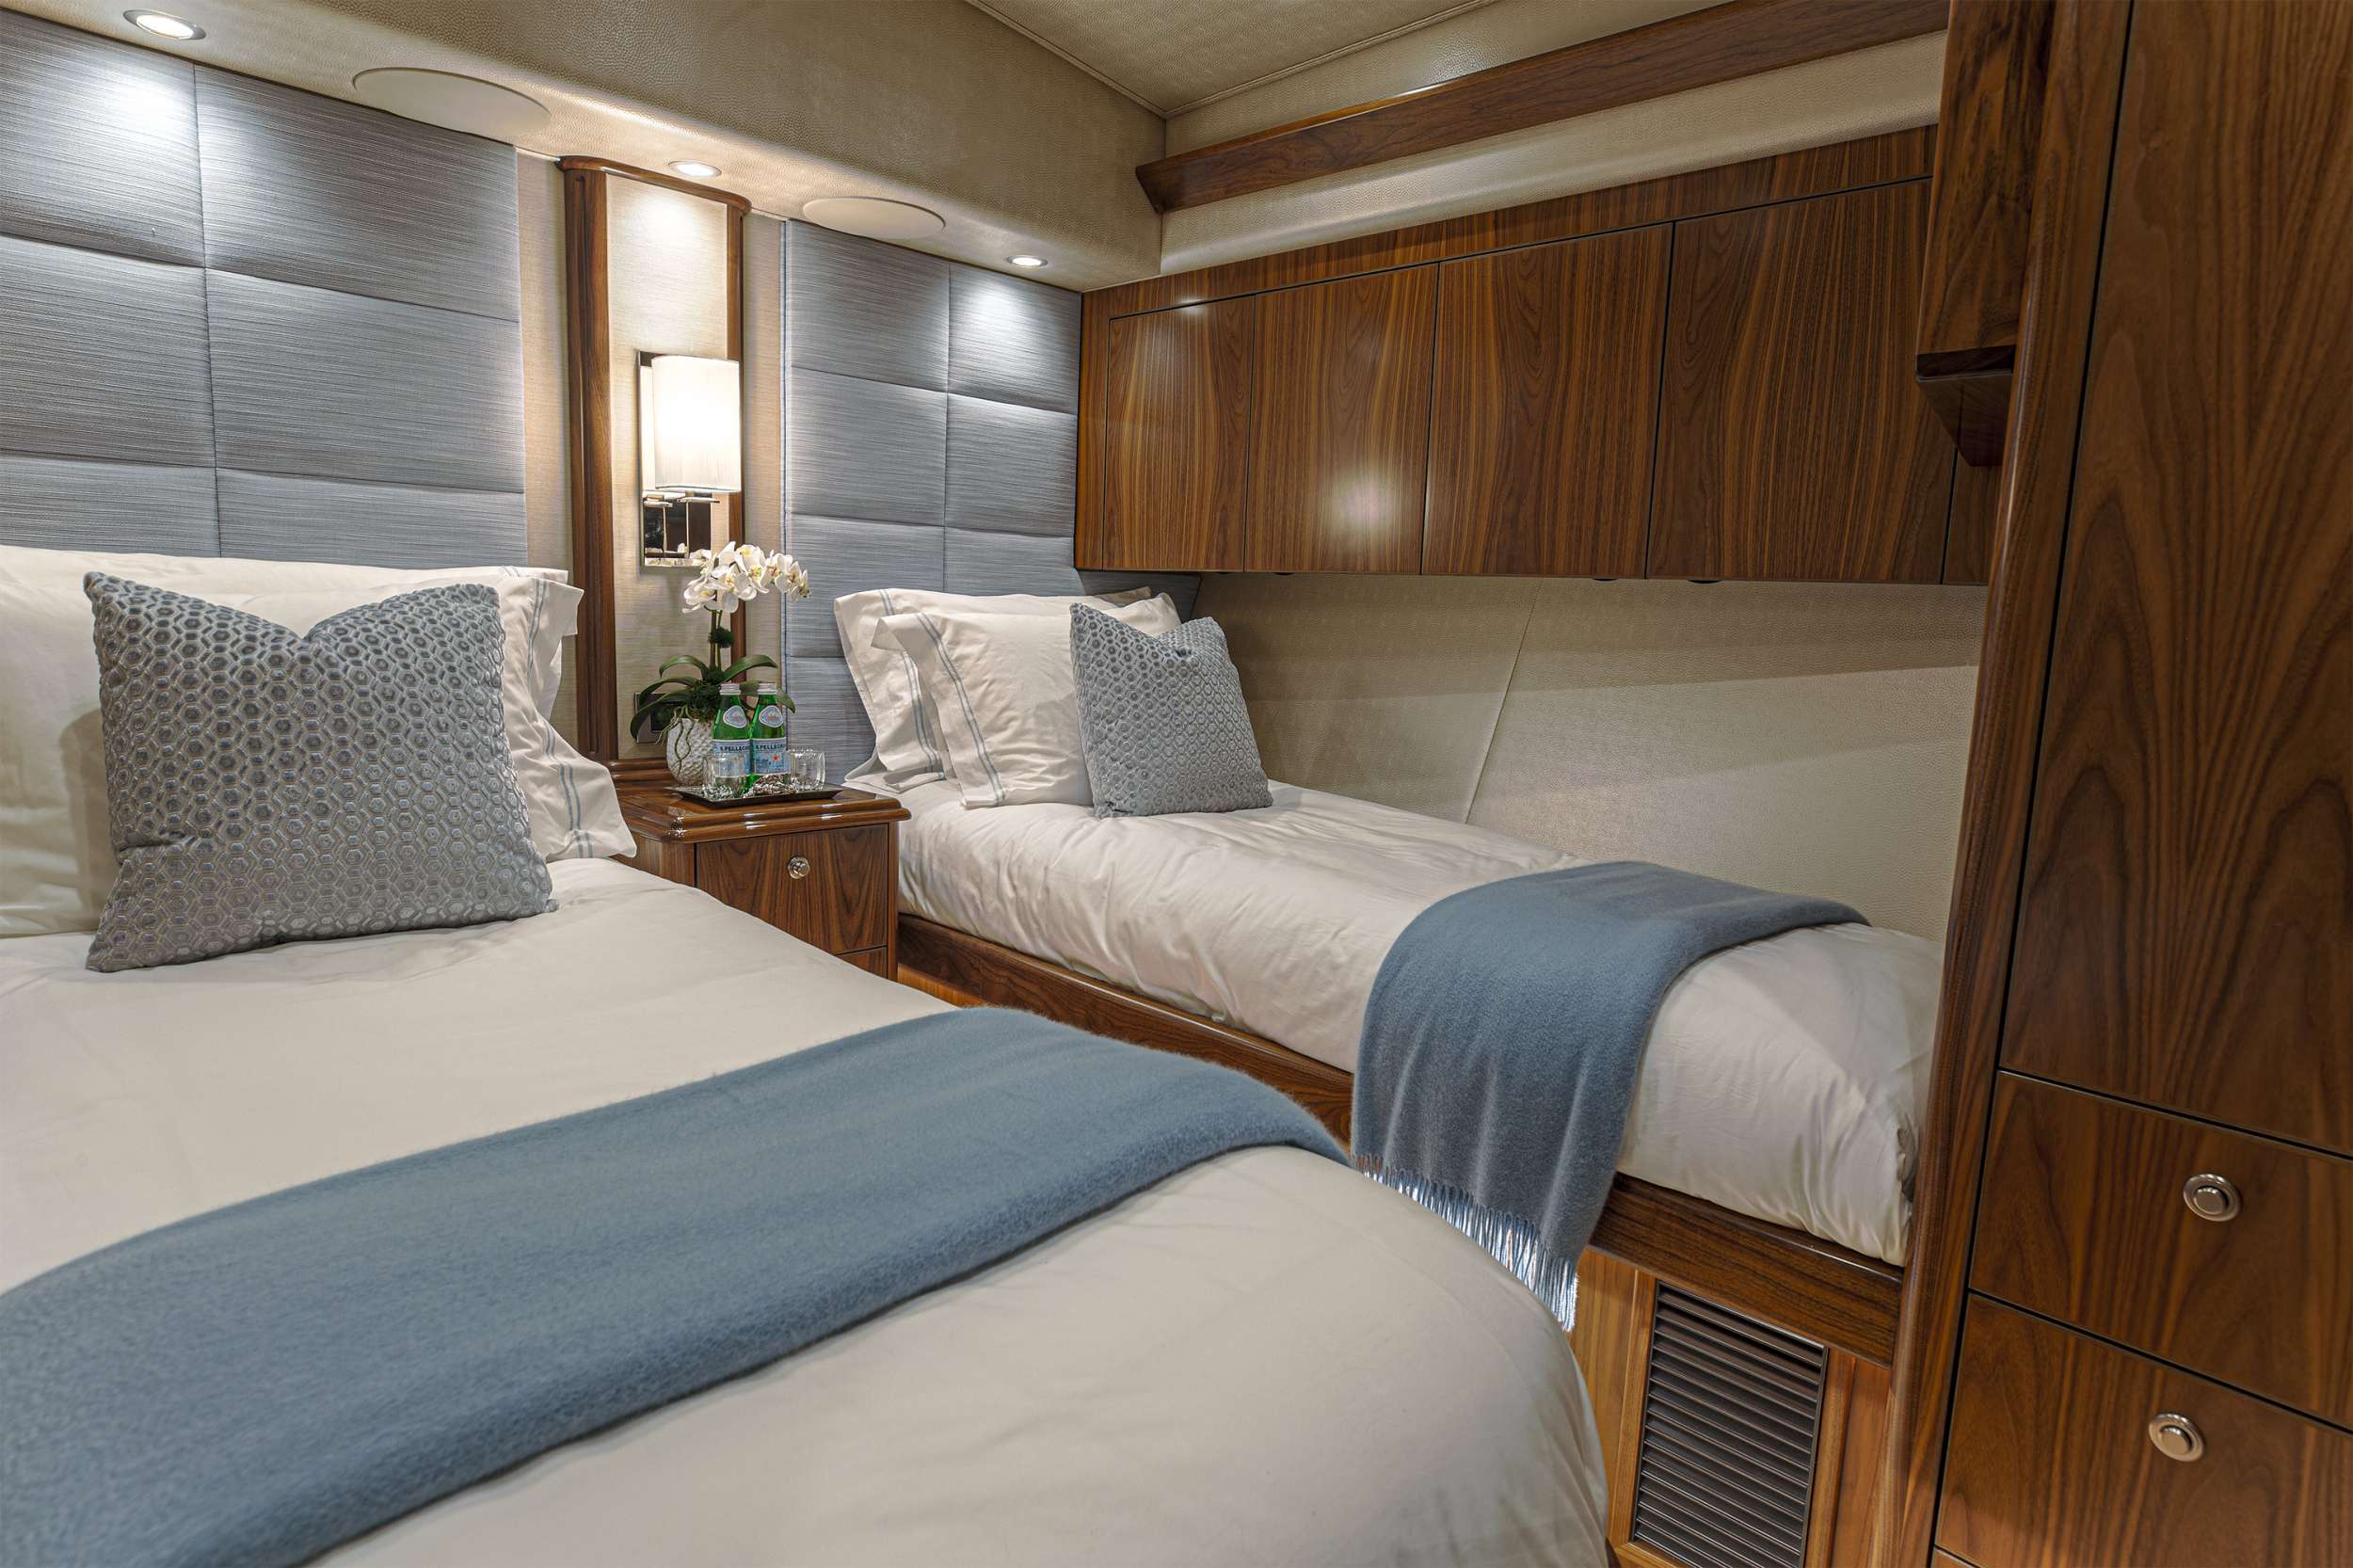 Motor Yacht 'SPECULATOR 92' Guest Twin Stateroom, 6 PAX, 3 Crew, 92.00 Ft, 28.00 Meters, Built 2017, Viking, U.S.A, Refit Year 2020